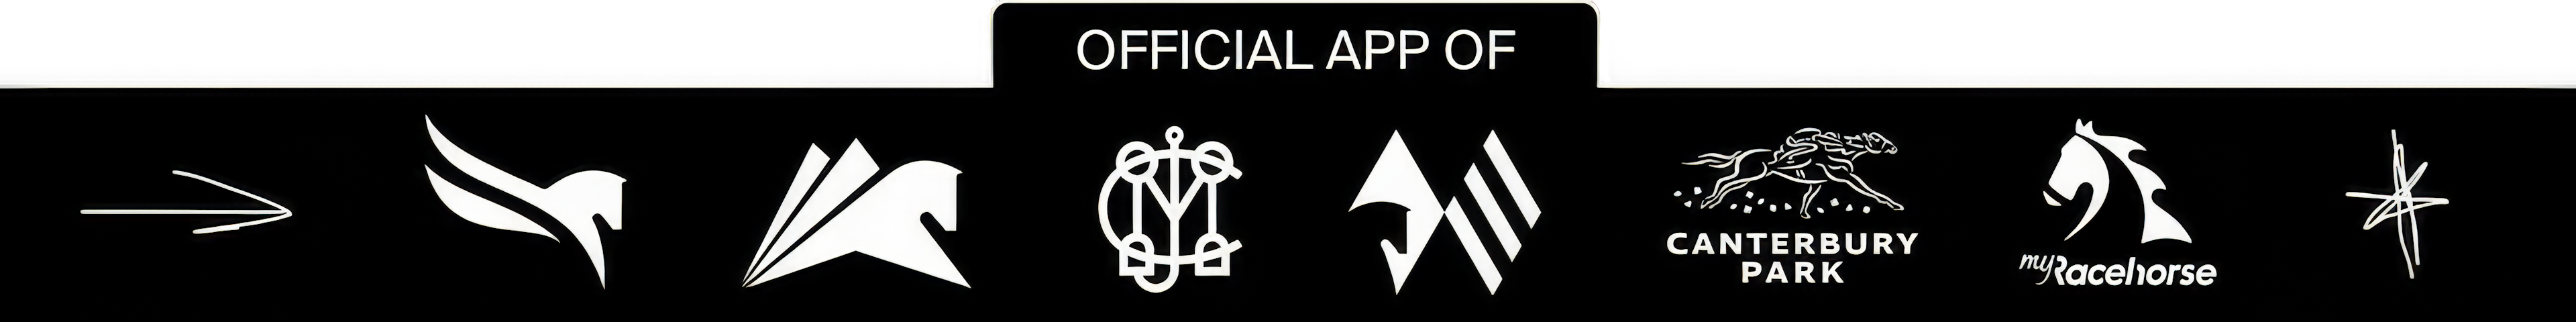 Official App of